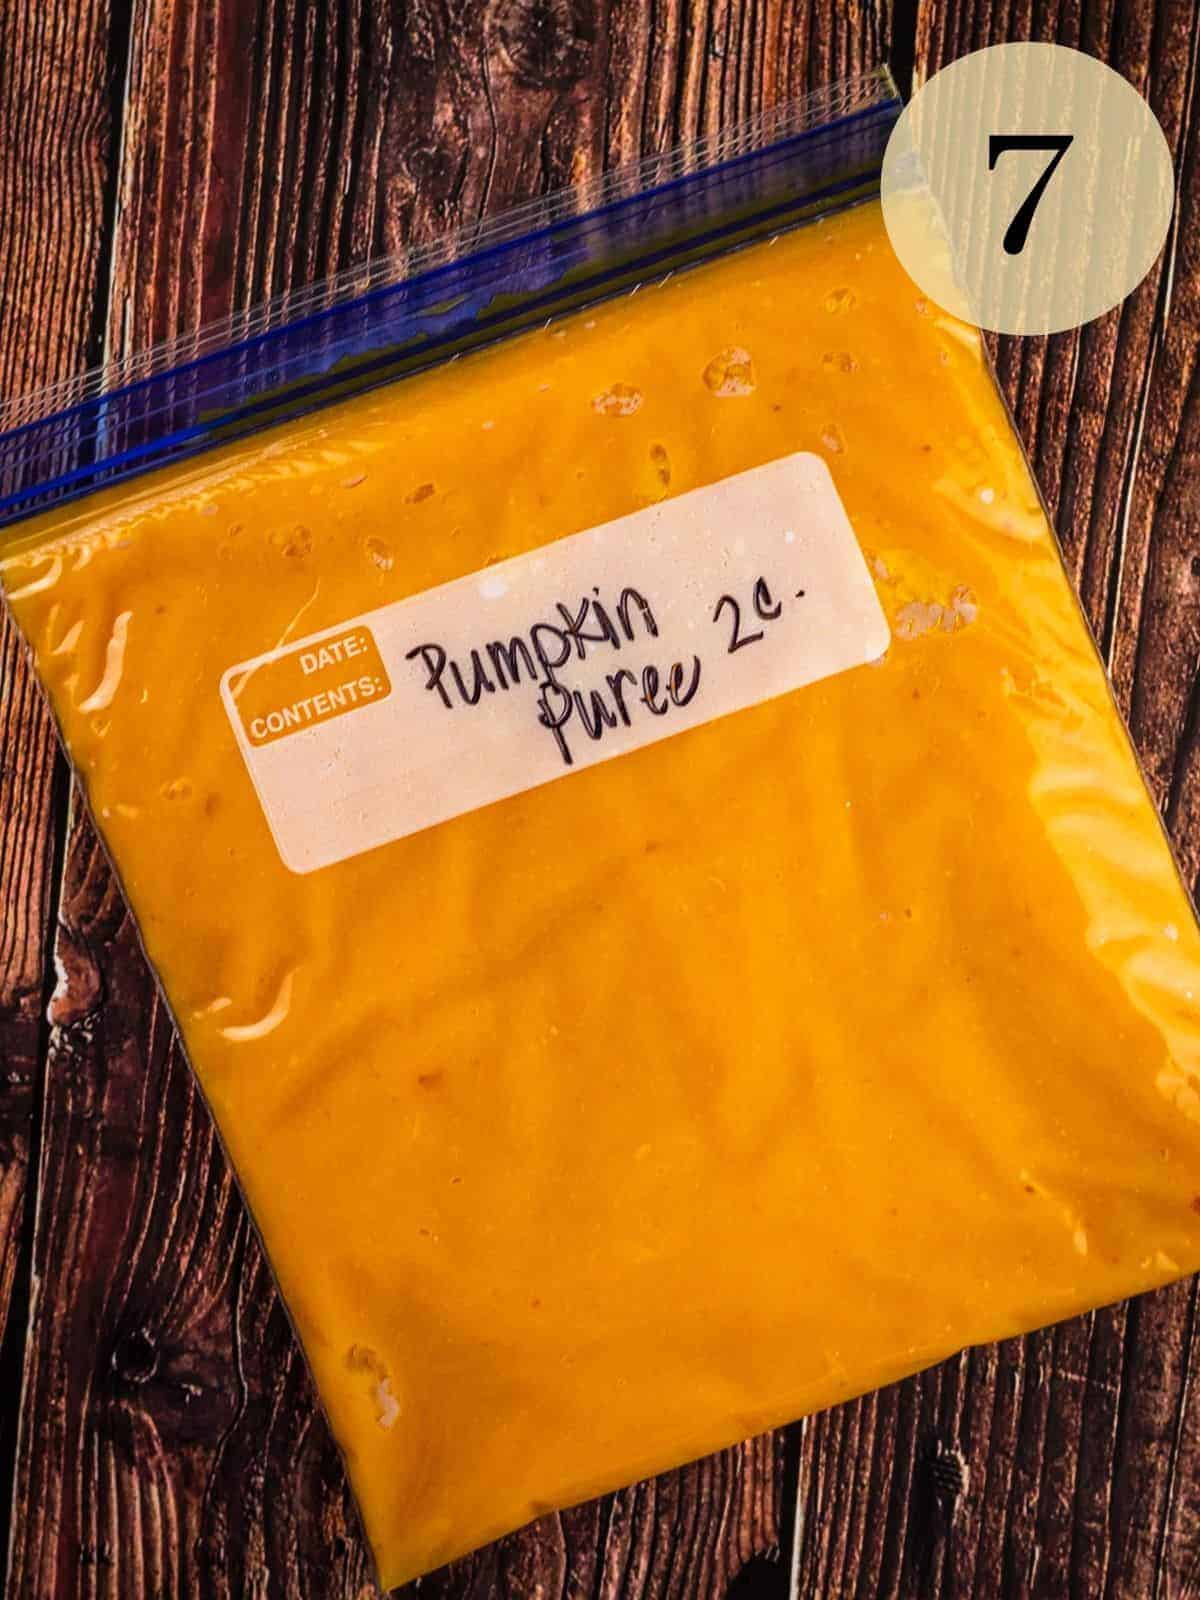 pumpkin puree in a ziptop bag on a table that is labeled "pumpkin puree two cups"